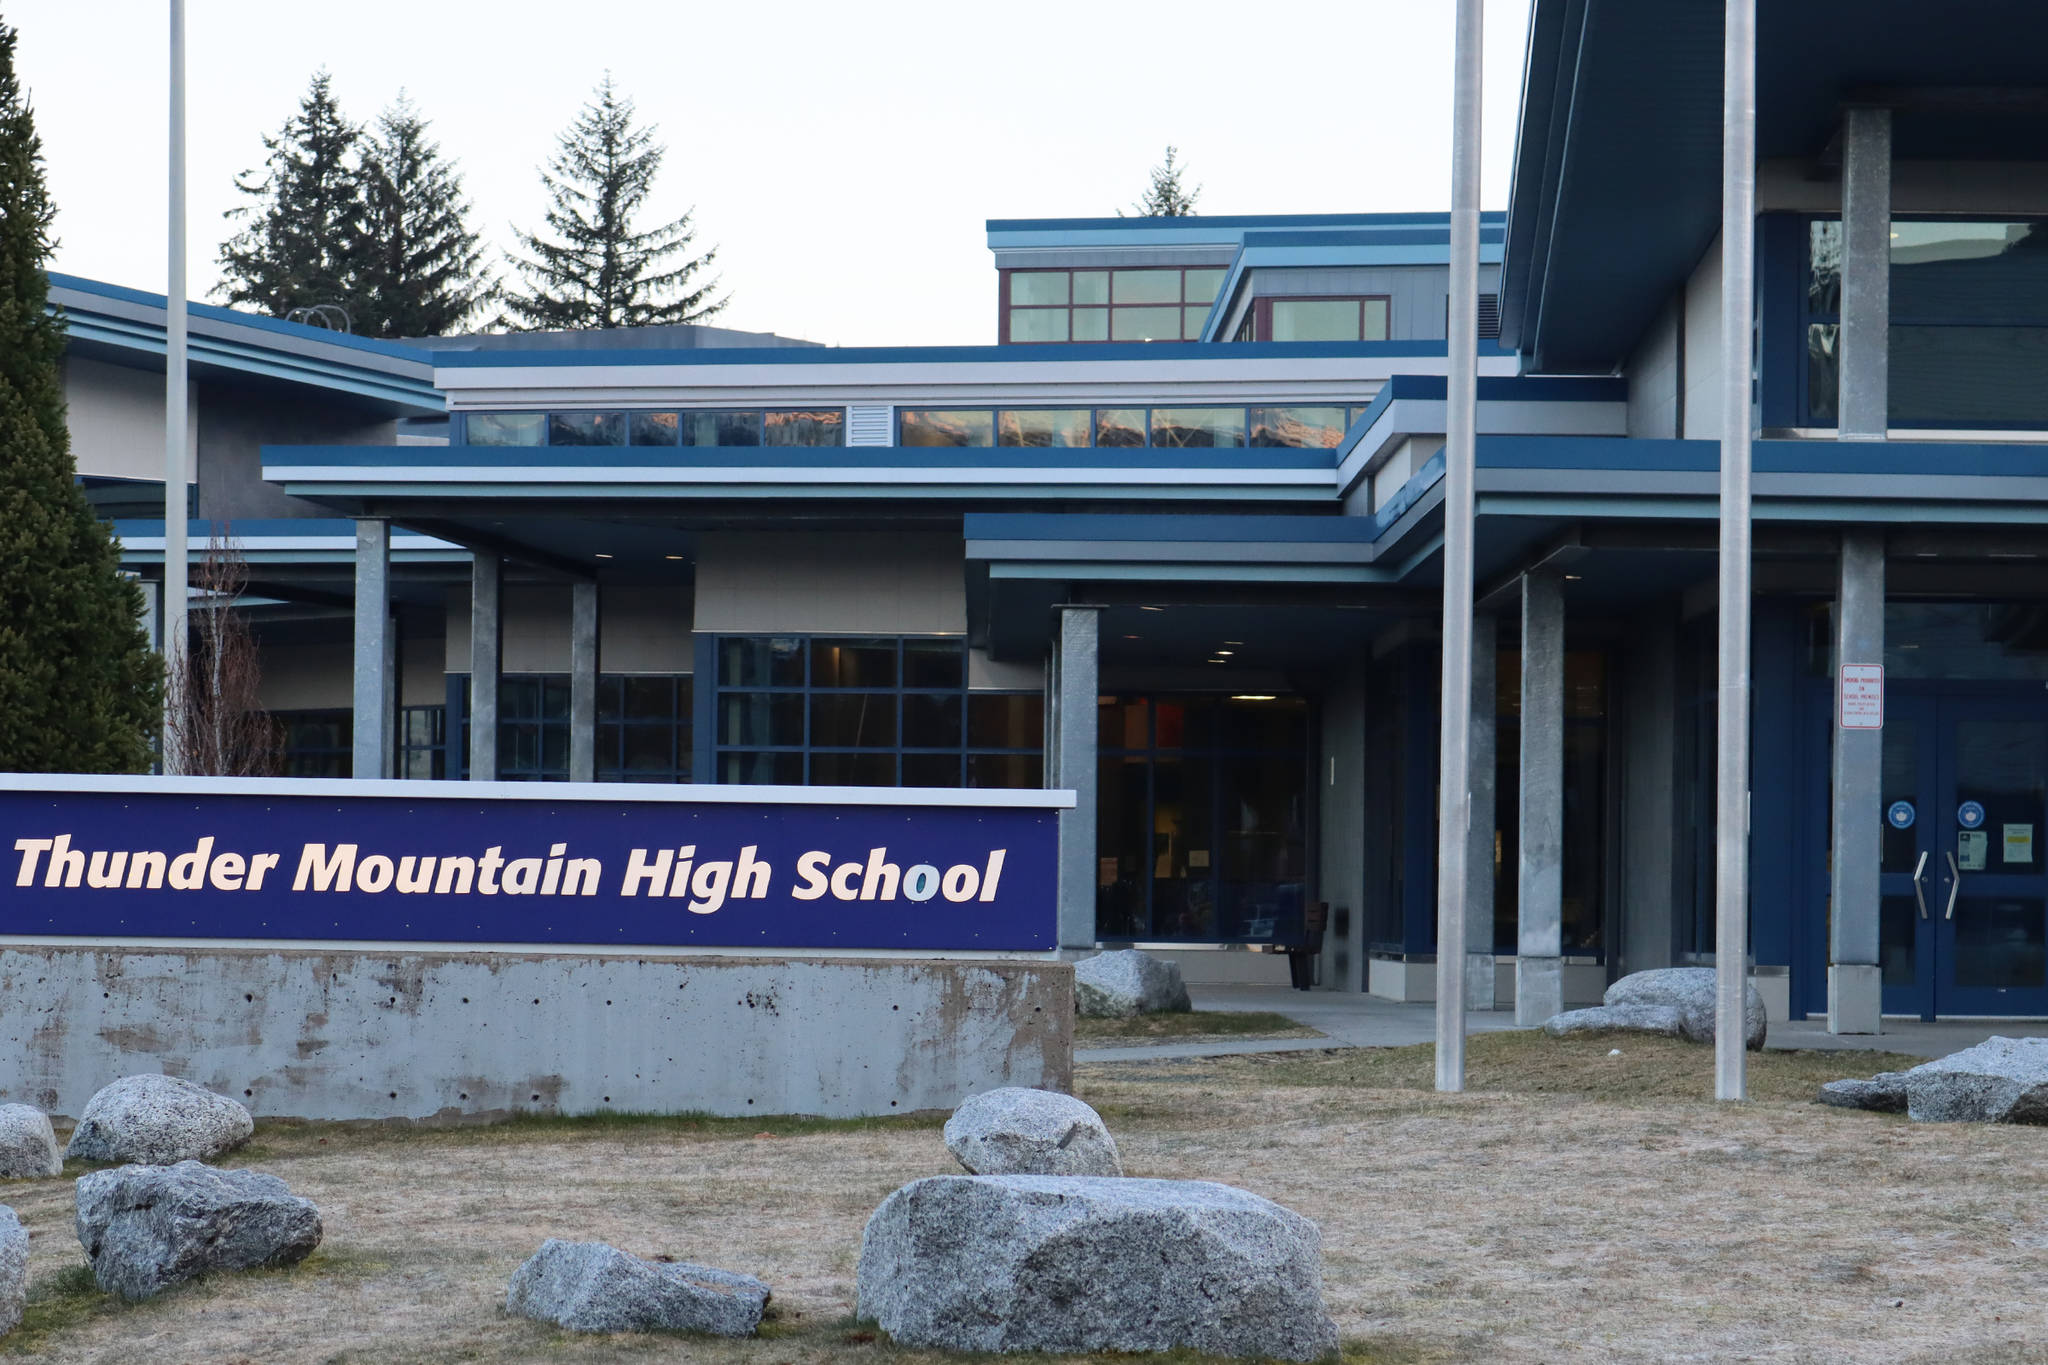 Thunder Mountain High School will be closed to in-person attendance until Monday, April 26, Juneau School District announced Tuesday afternoon. (Ben Hohenstatt / Juneau Empire)